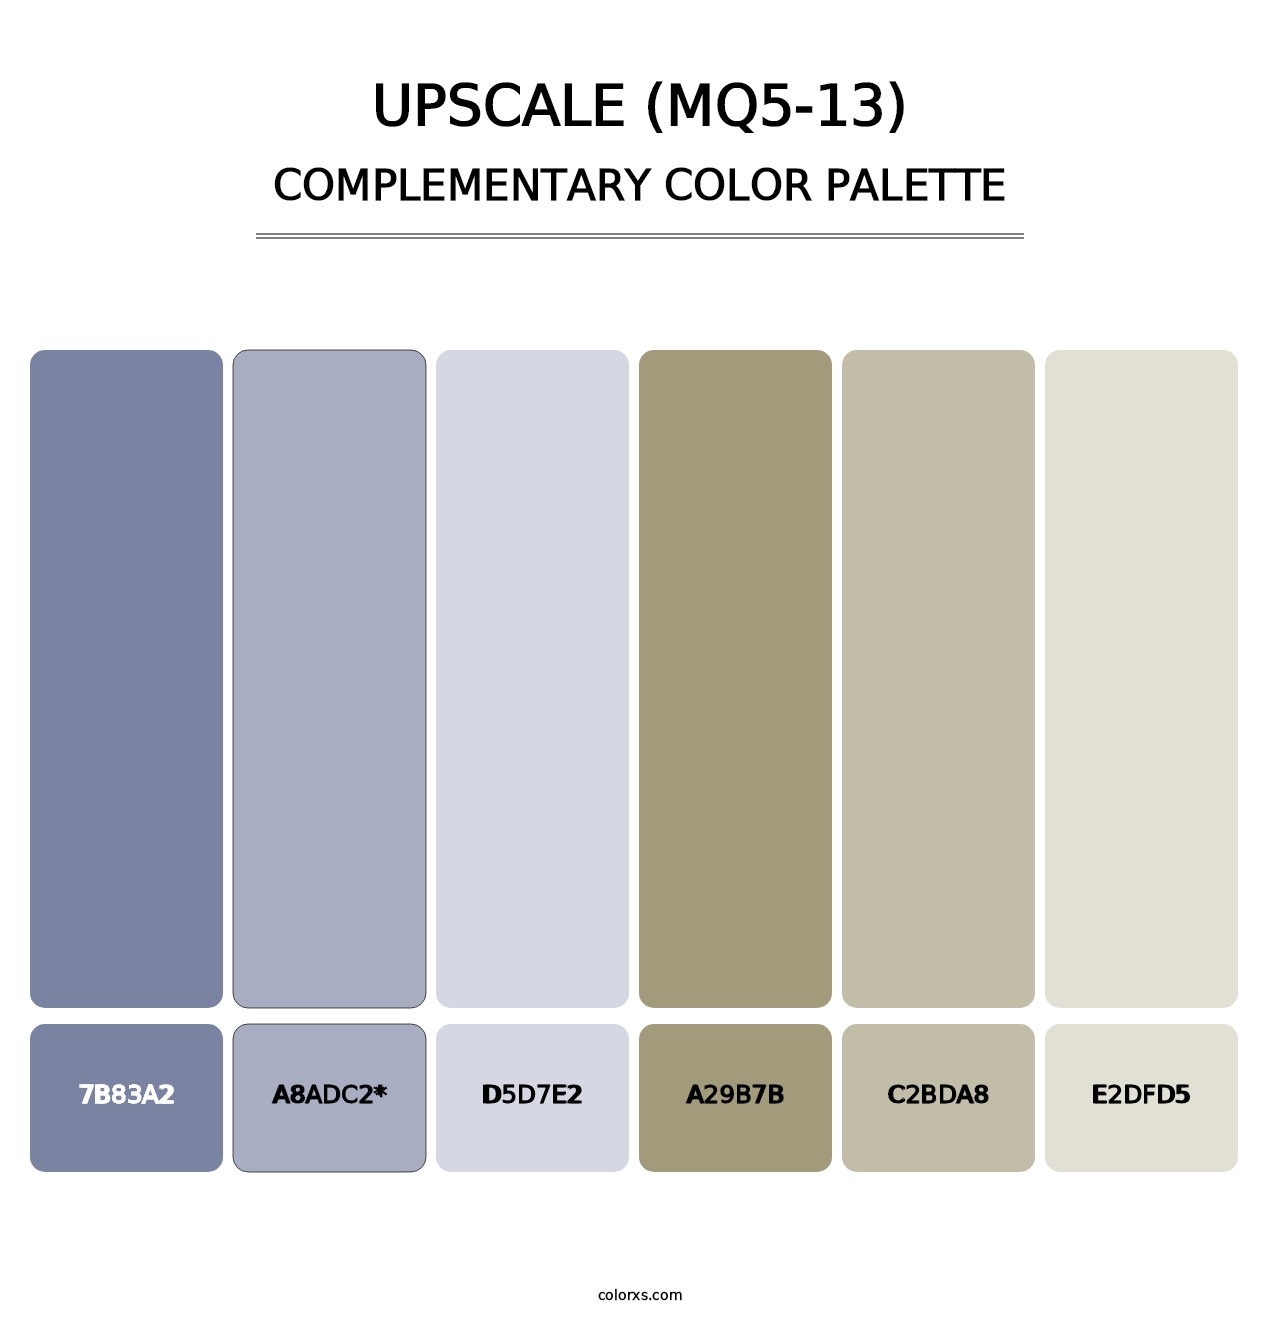 Upscale (MQ5-13) - Complementary Color Palette